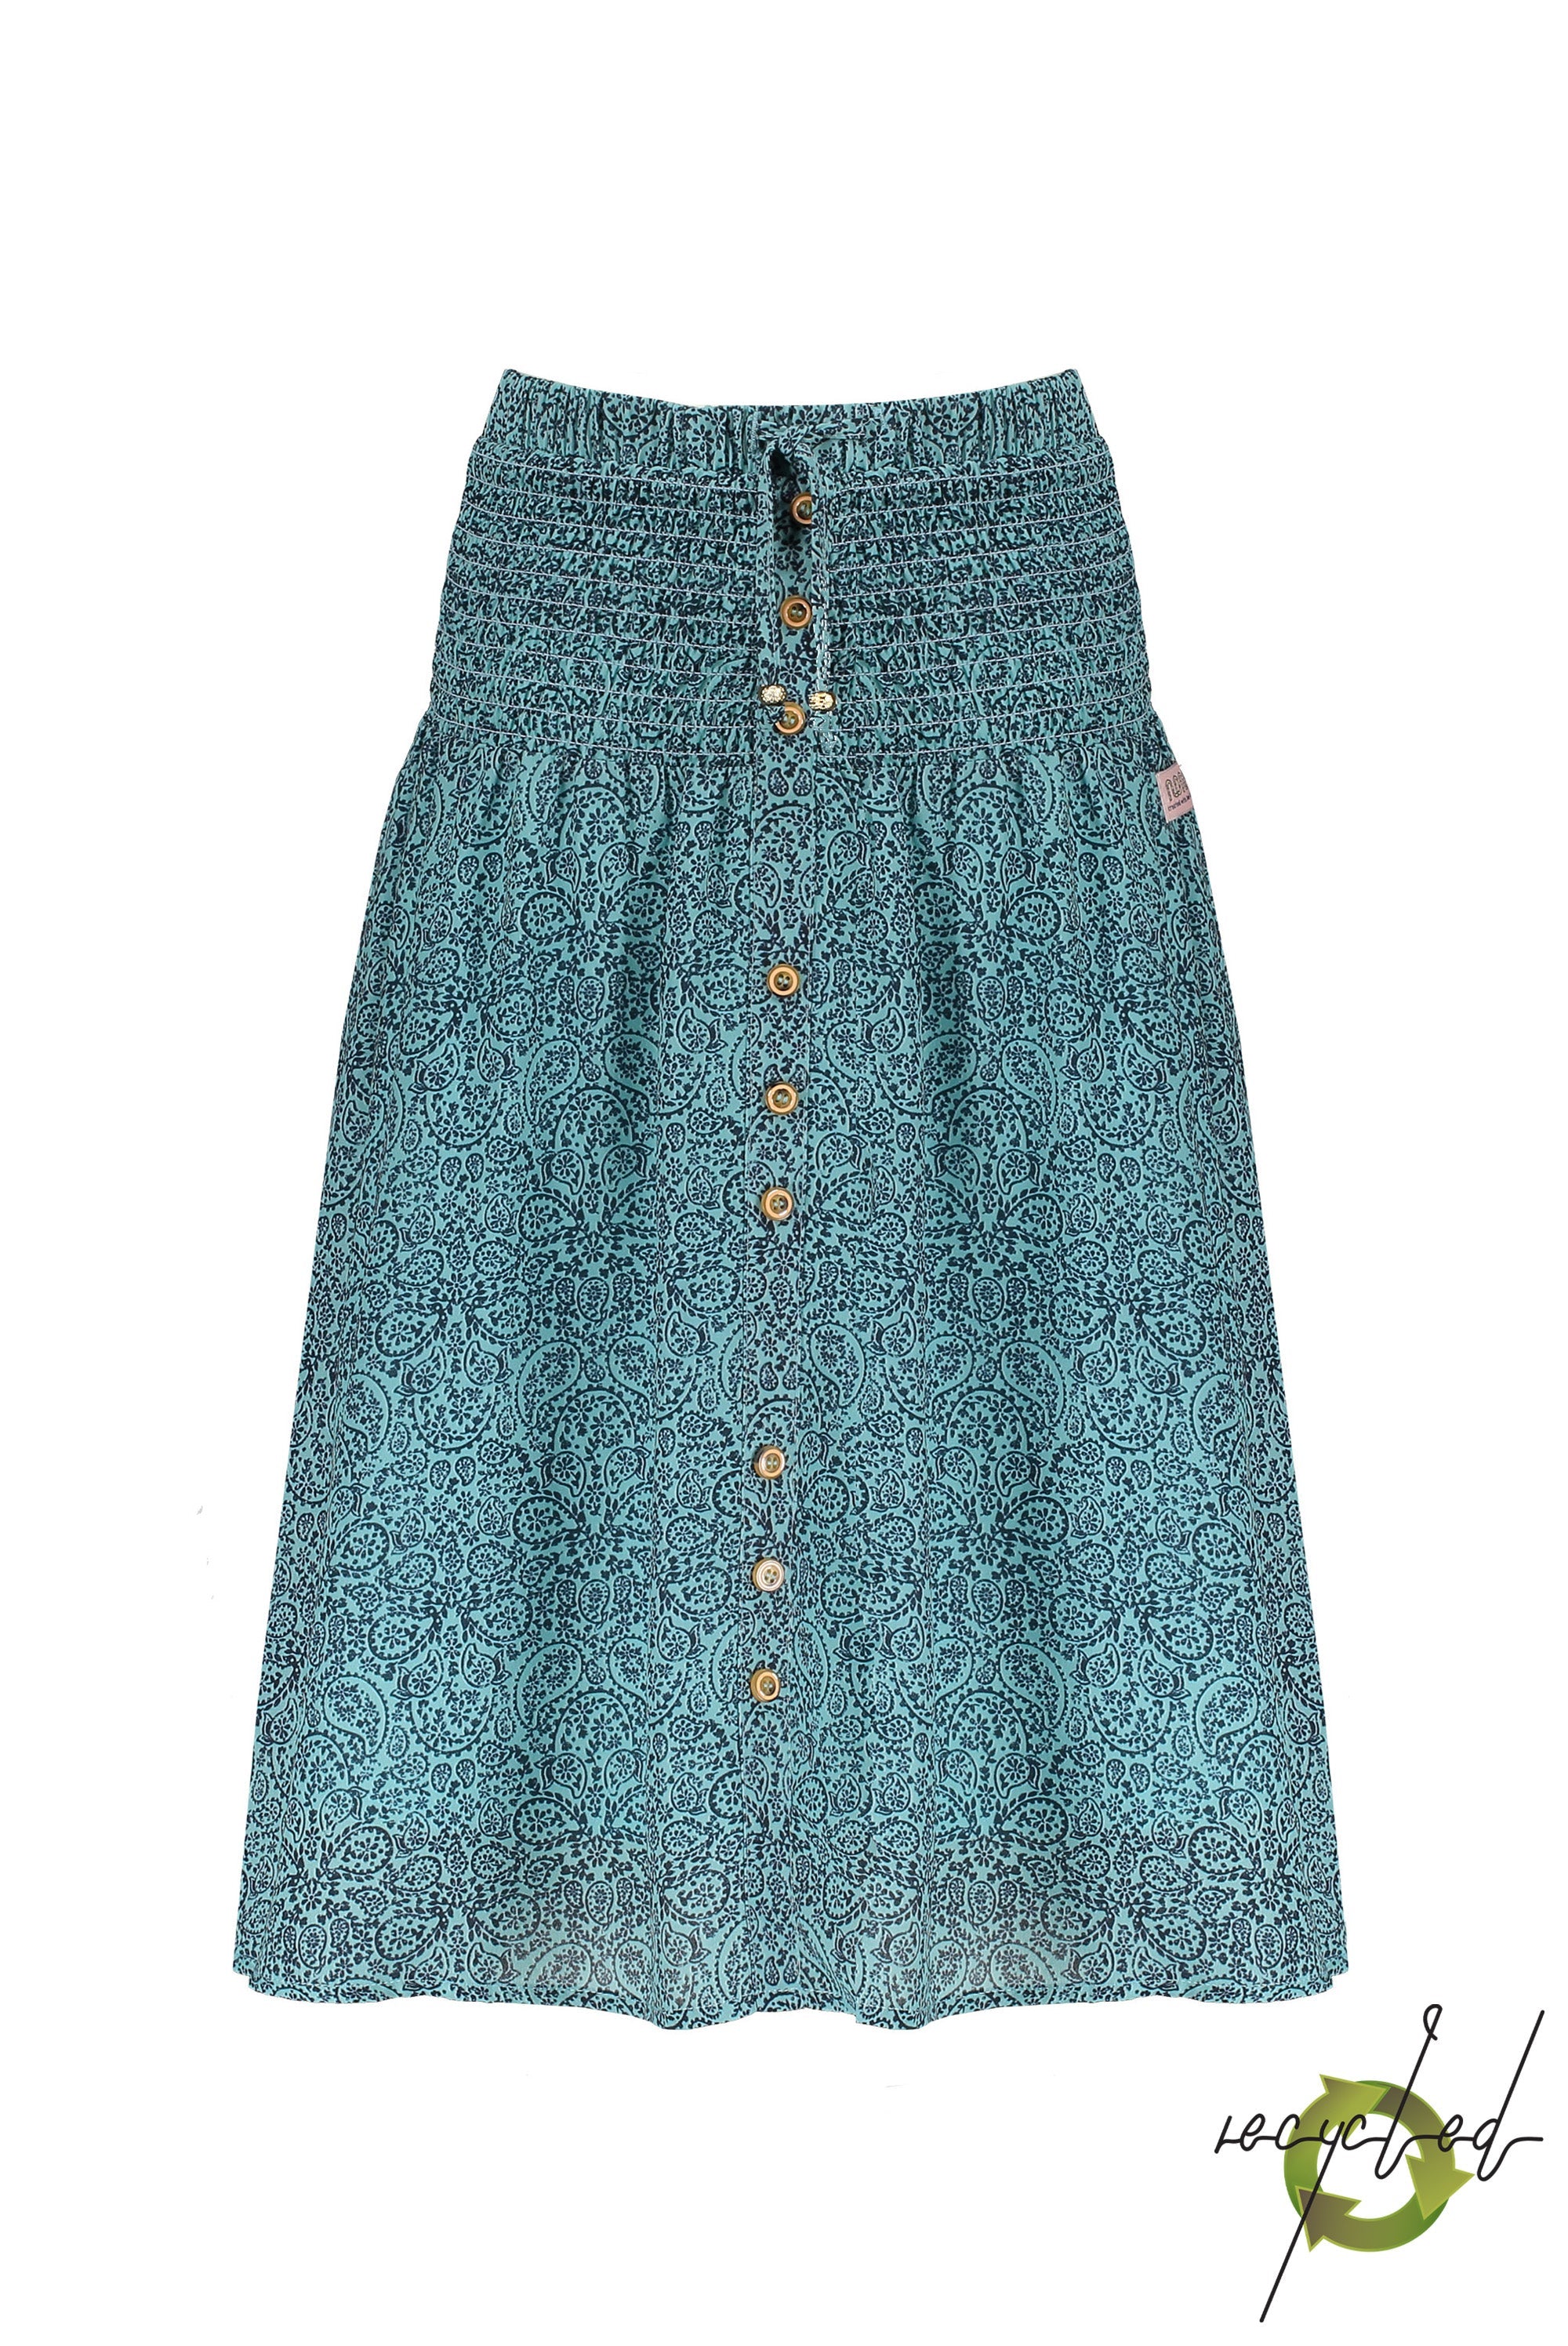 Meisjes Nom maxi skirt with buttons at front+smocked waistband van NoNo in de kleur Light Turquoise in maat 146/152.